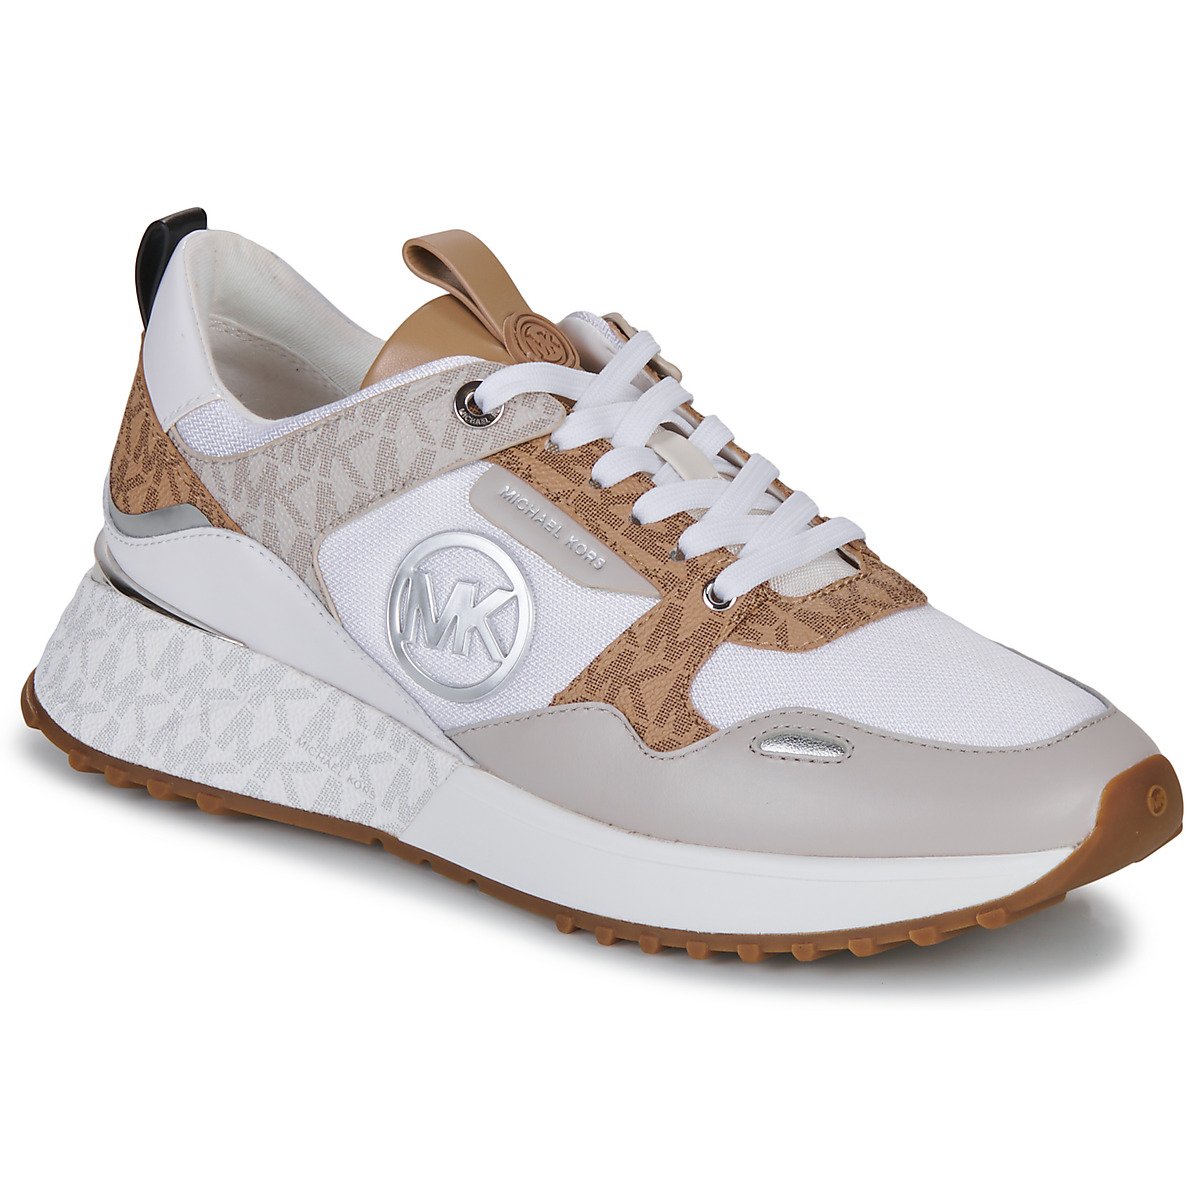 MICHAEL Michael Kors THEO TRAINER White  Camel  Fast delivery  Spartoo  Europe   Shoes Low top trainers Women 24800 